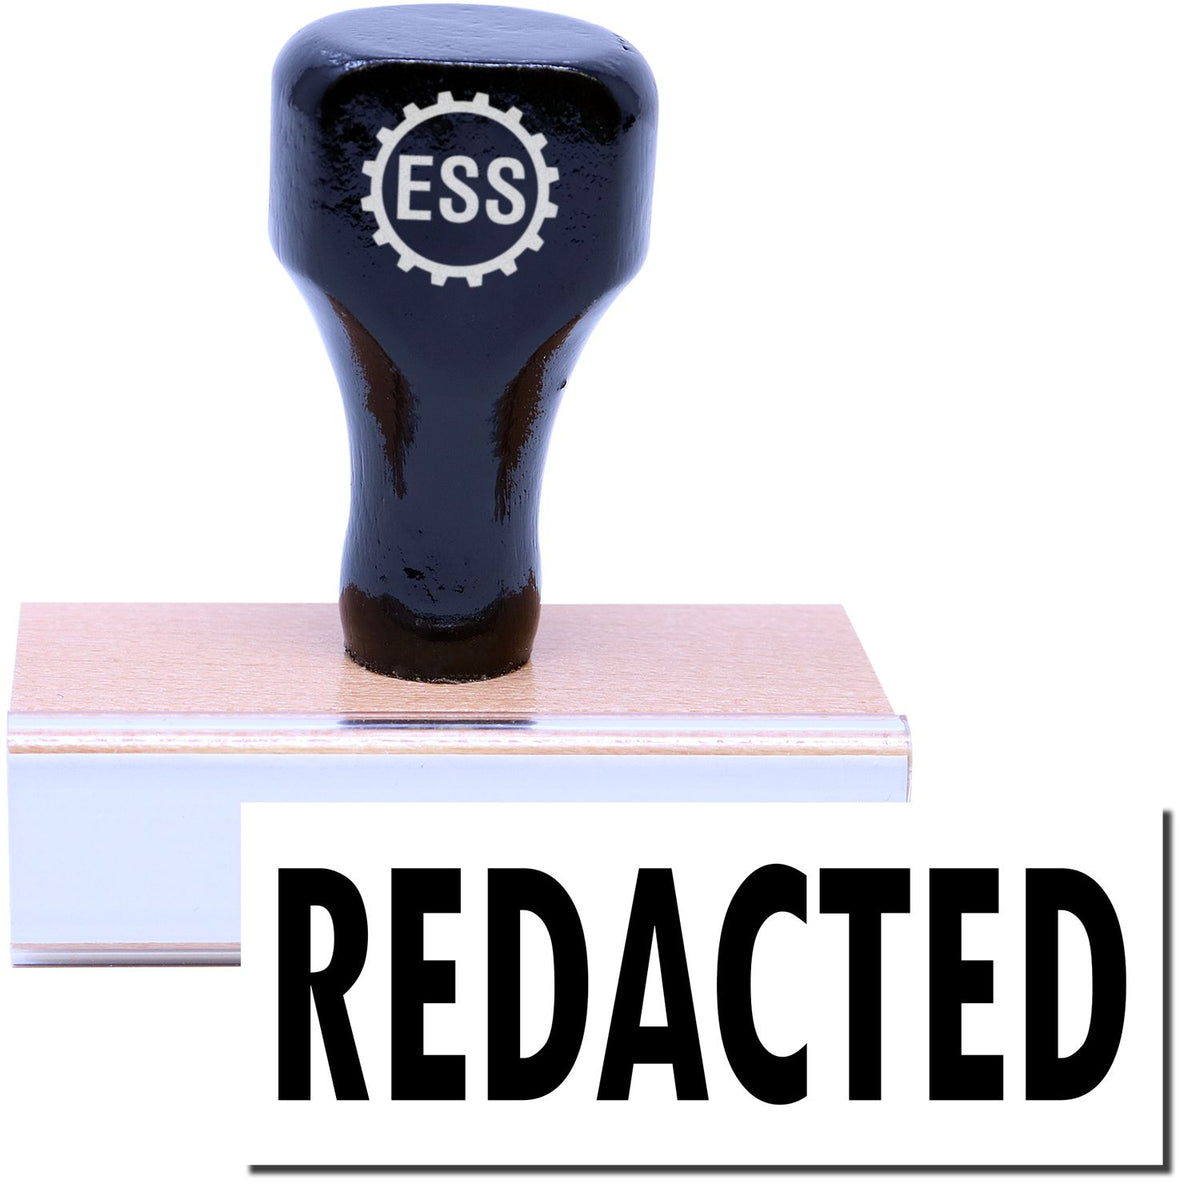 A stock office rubber stamp with a stamped image showing how the text &quot;REDACTED&quot; in a large font is displayed after stamping.